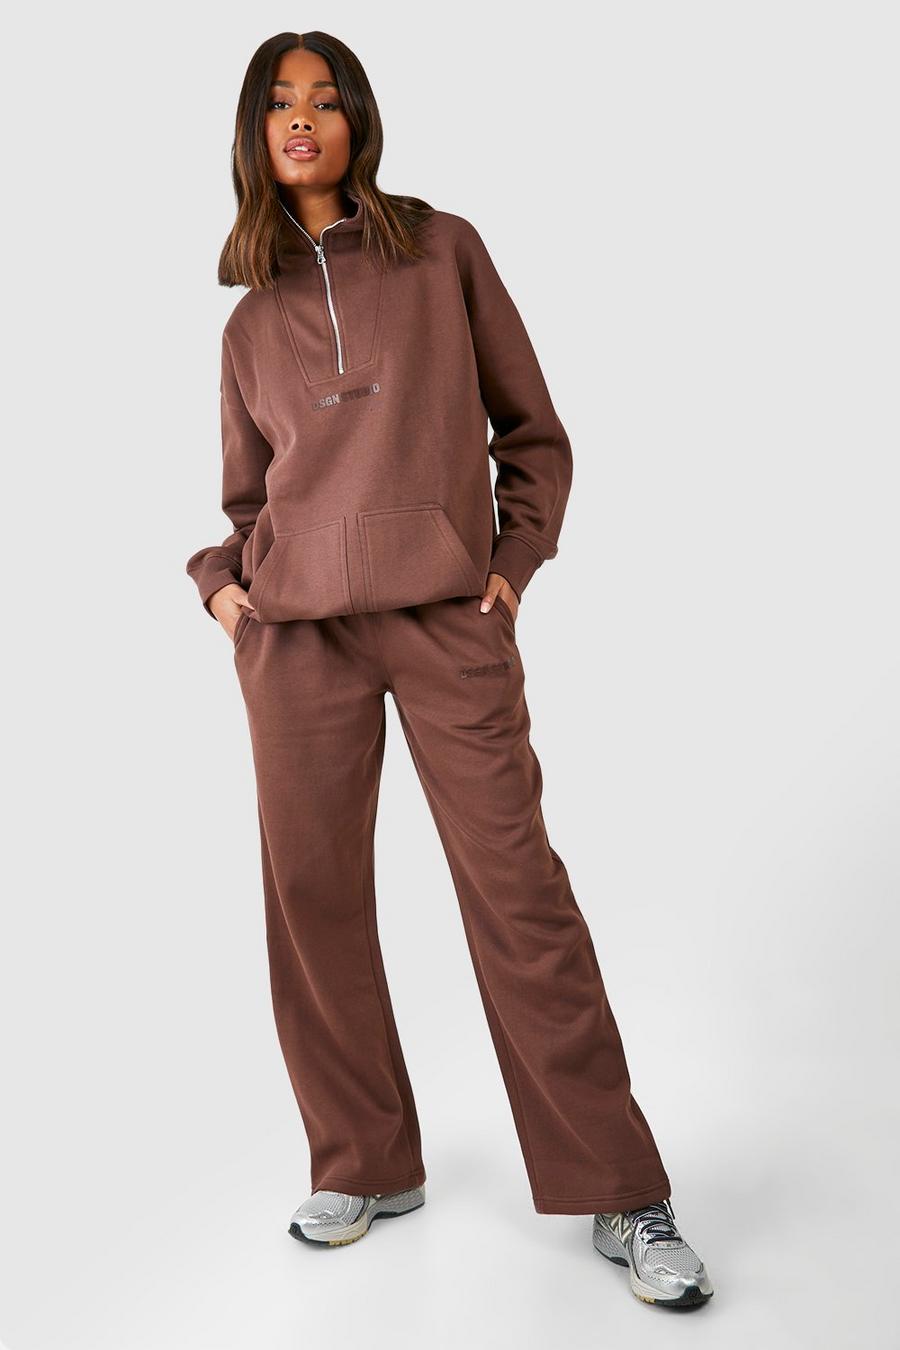 Plt Tall Chocolate Badge Straight Leg Joggers  Striped sweatpants,  Straight leg, Brown jumper outfit